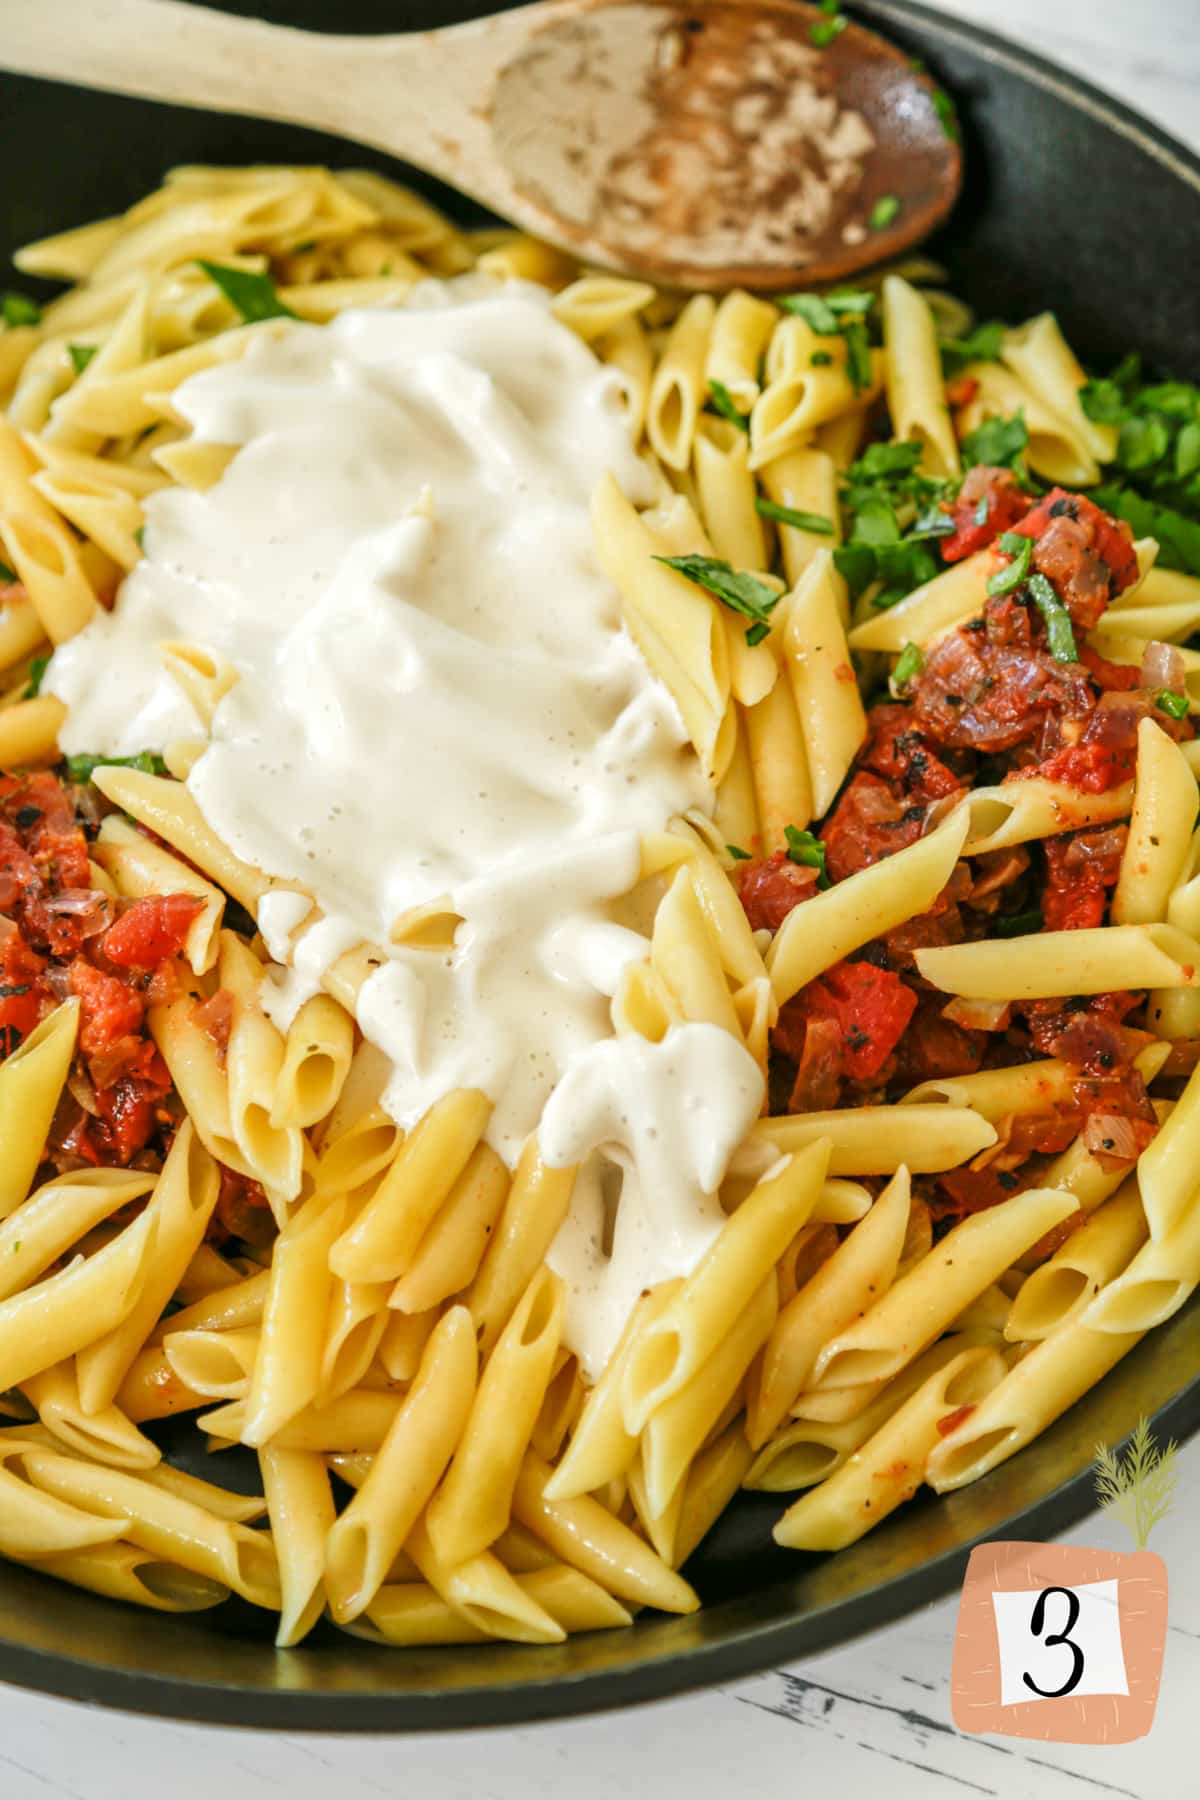 An iron skillet with penne pasta, tomatoes, and a cream sauce.